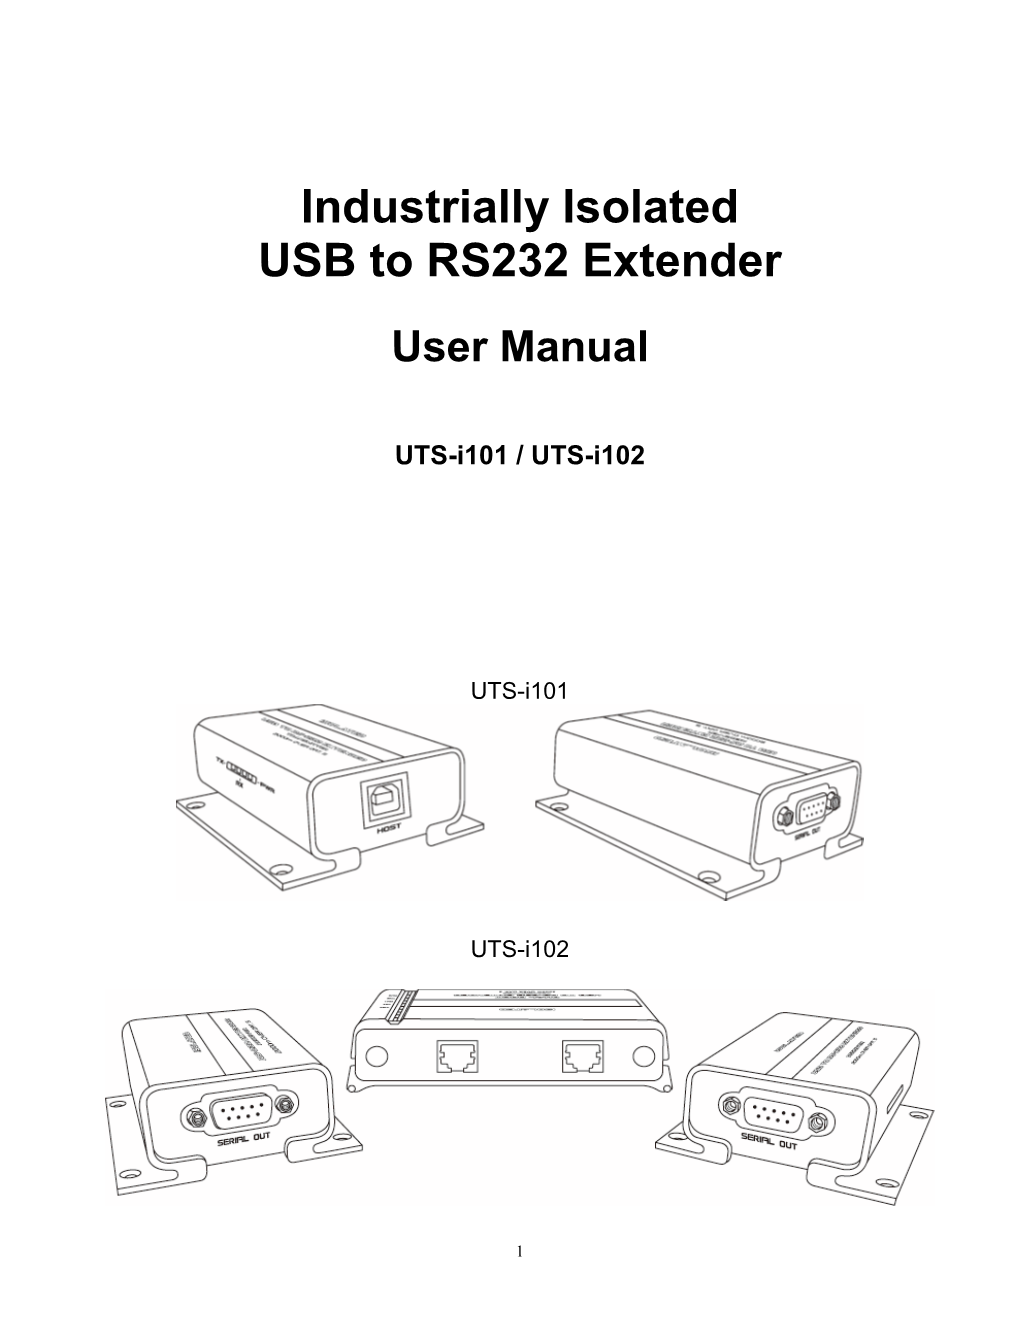 Industrially Isolated USB to RS232 Extender